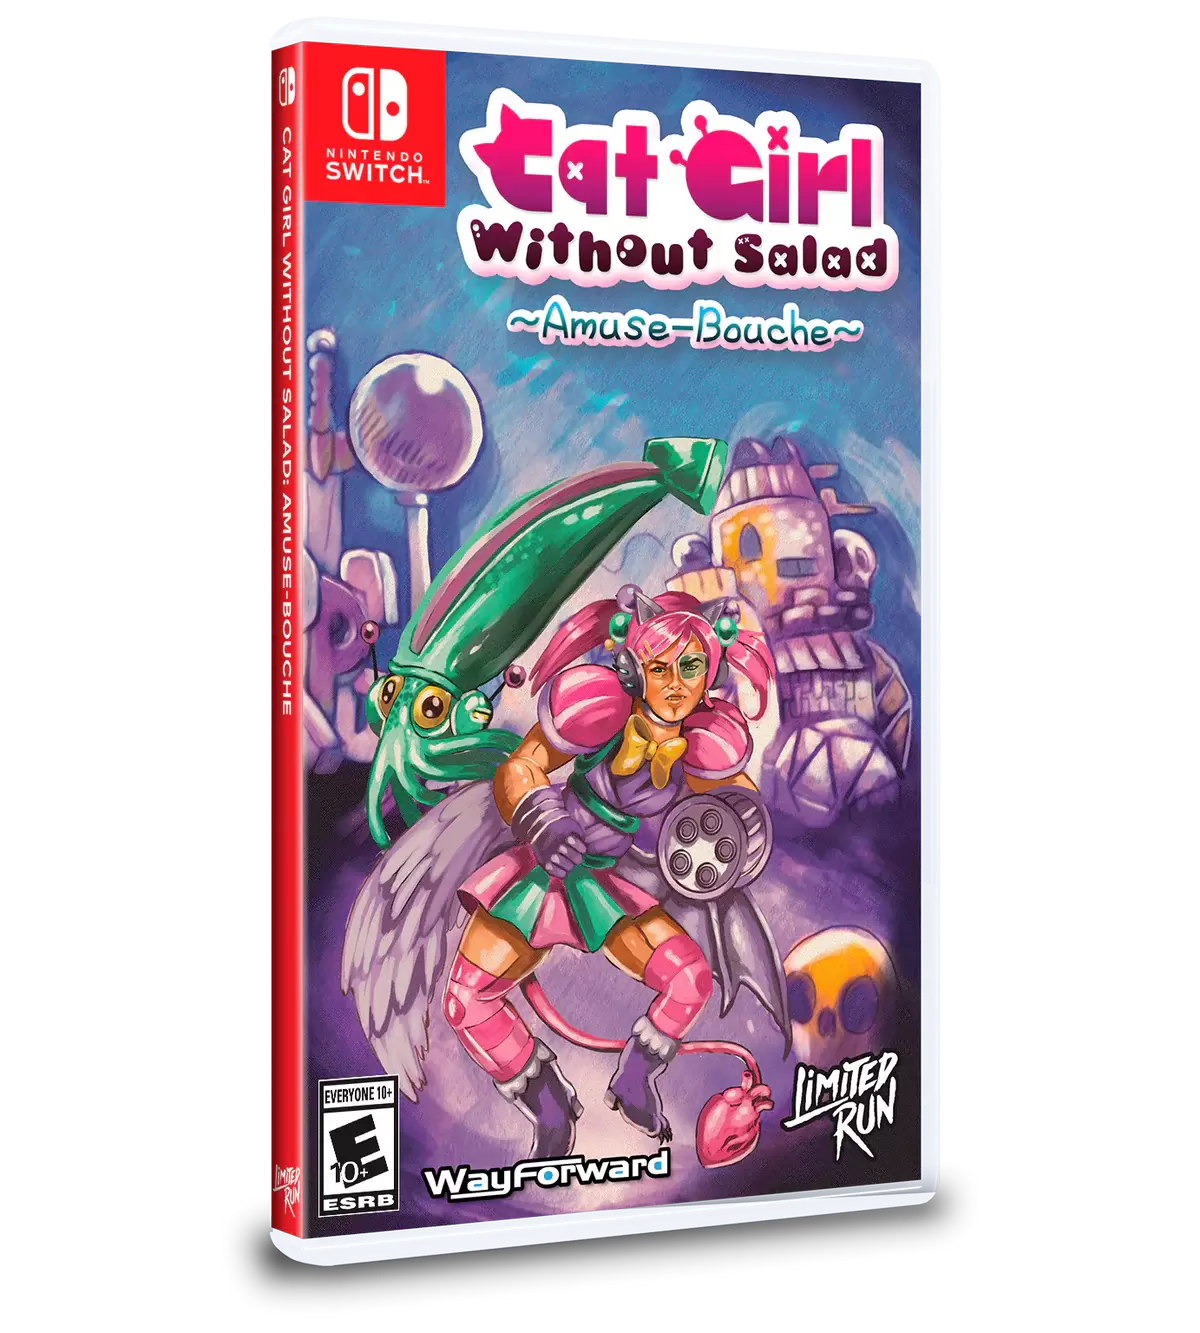 Nintendo Switch Games - Cat Girl Without Salad: Amuse-Bouche